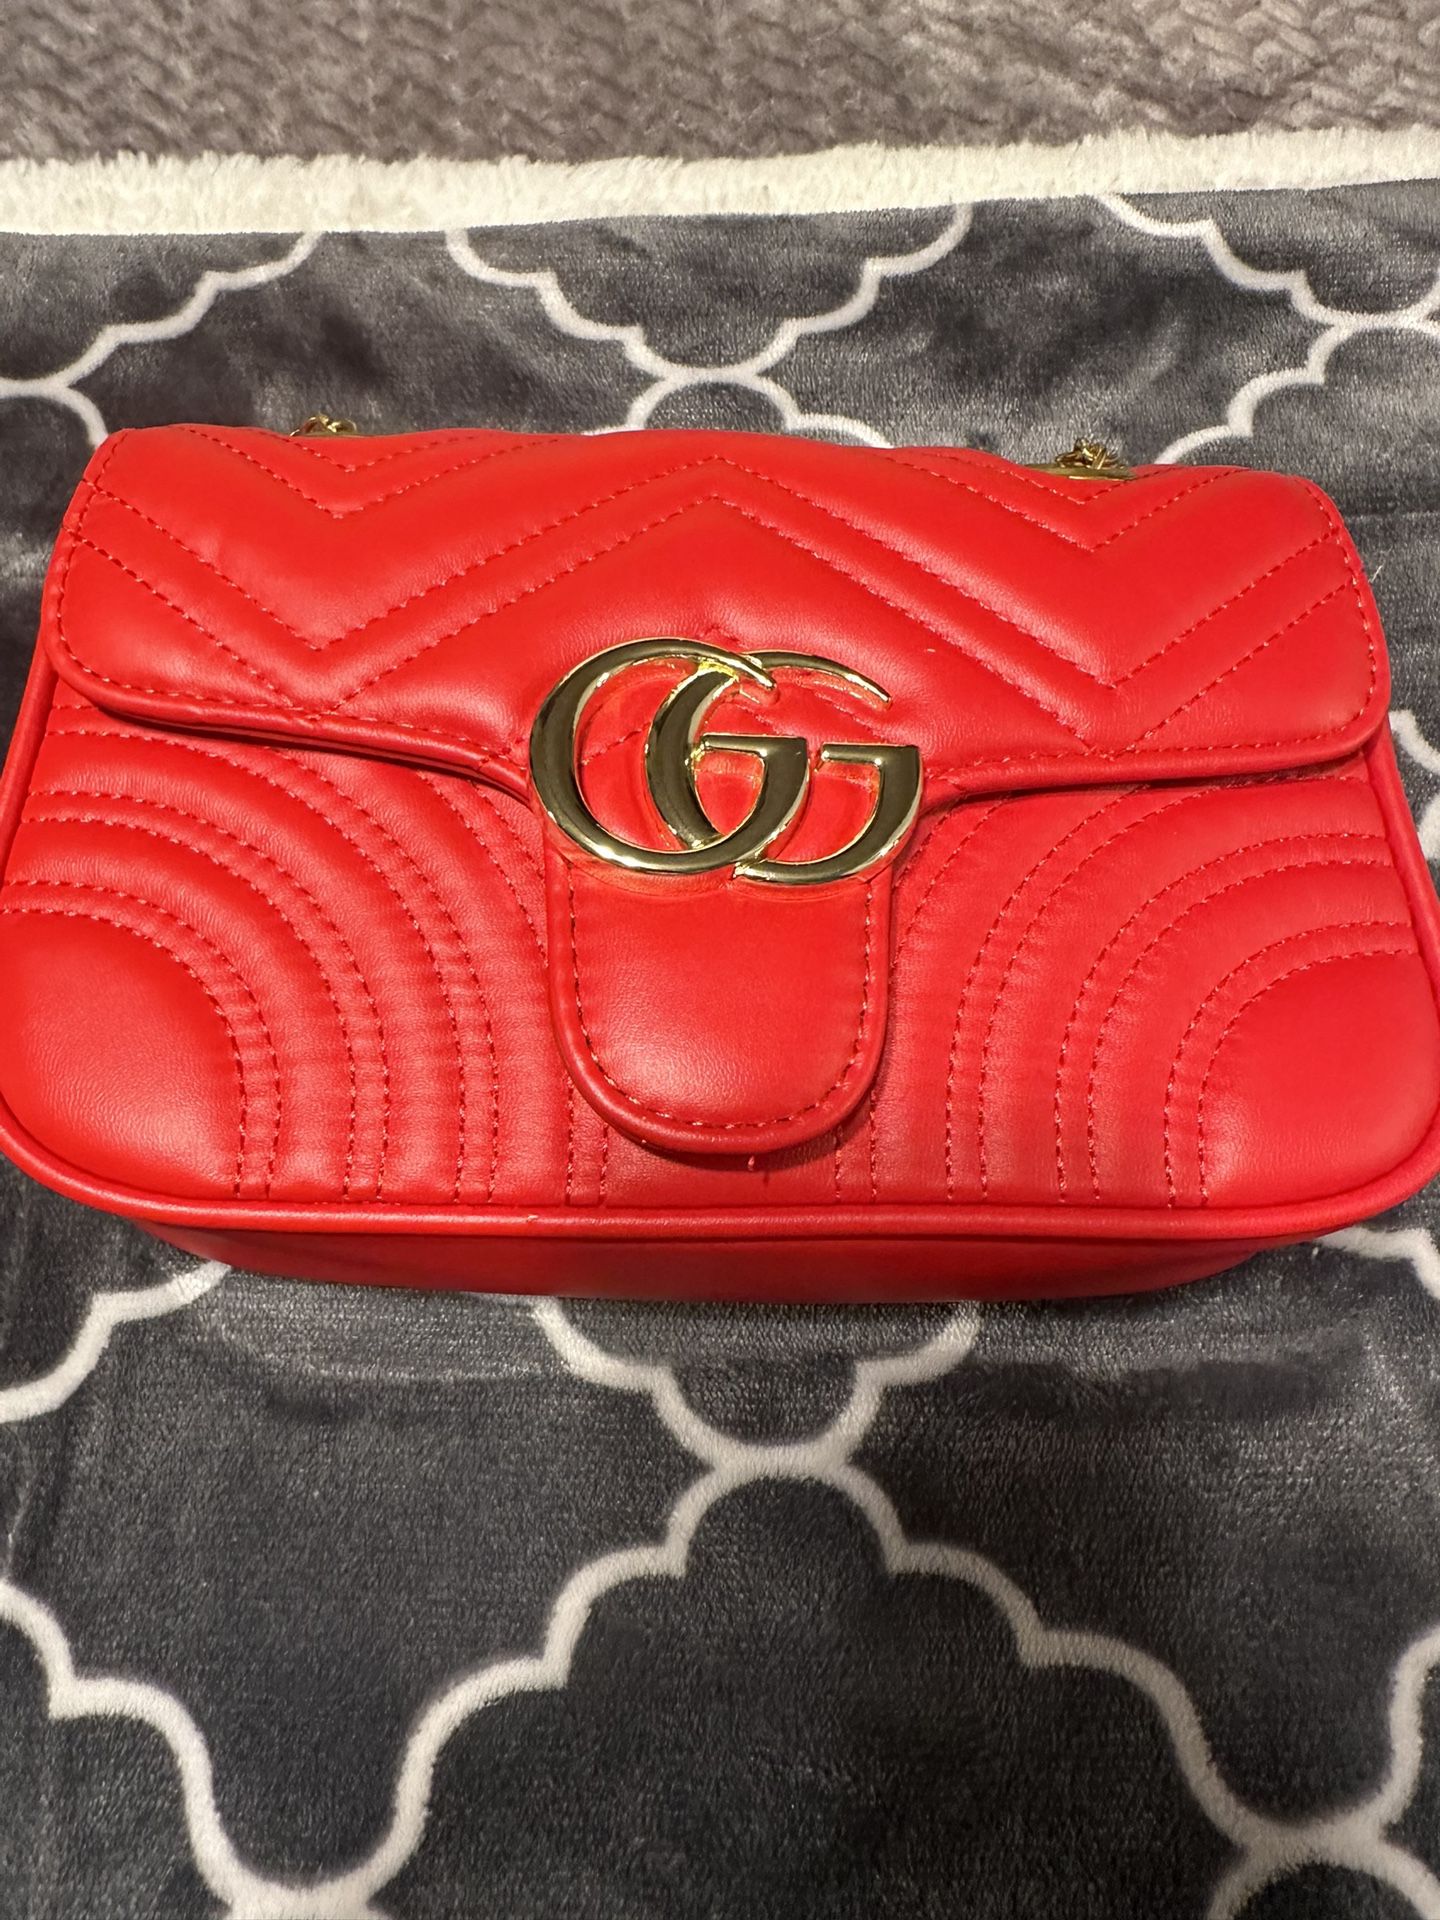 Red Crossbody With Gold Chain 